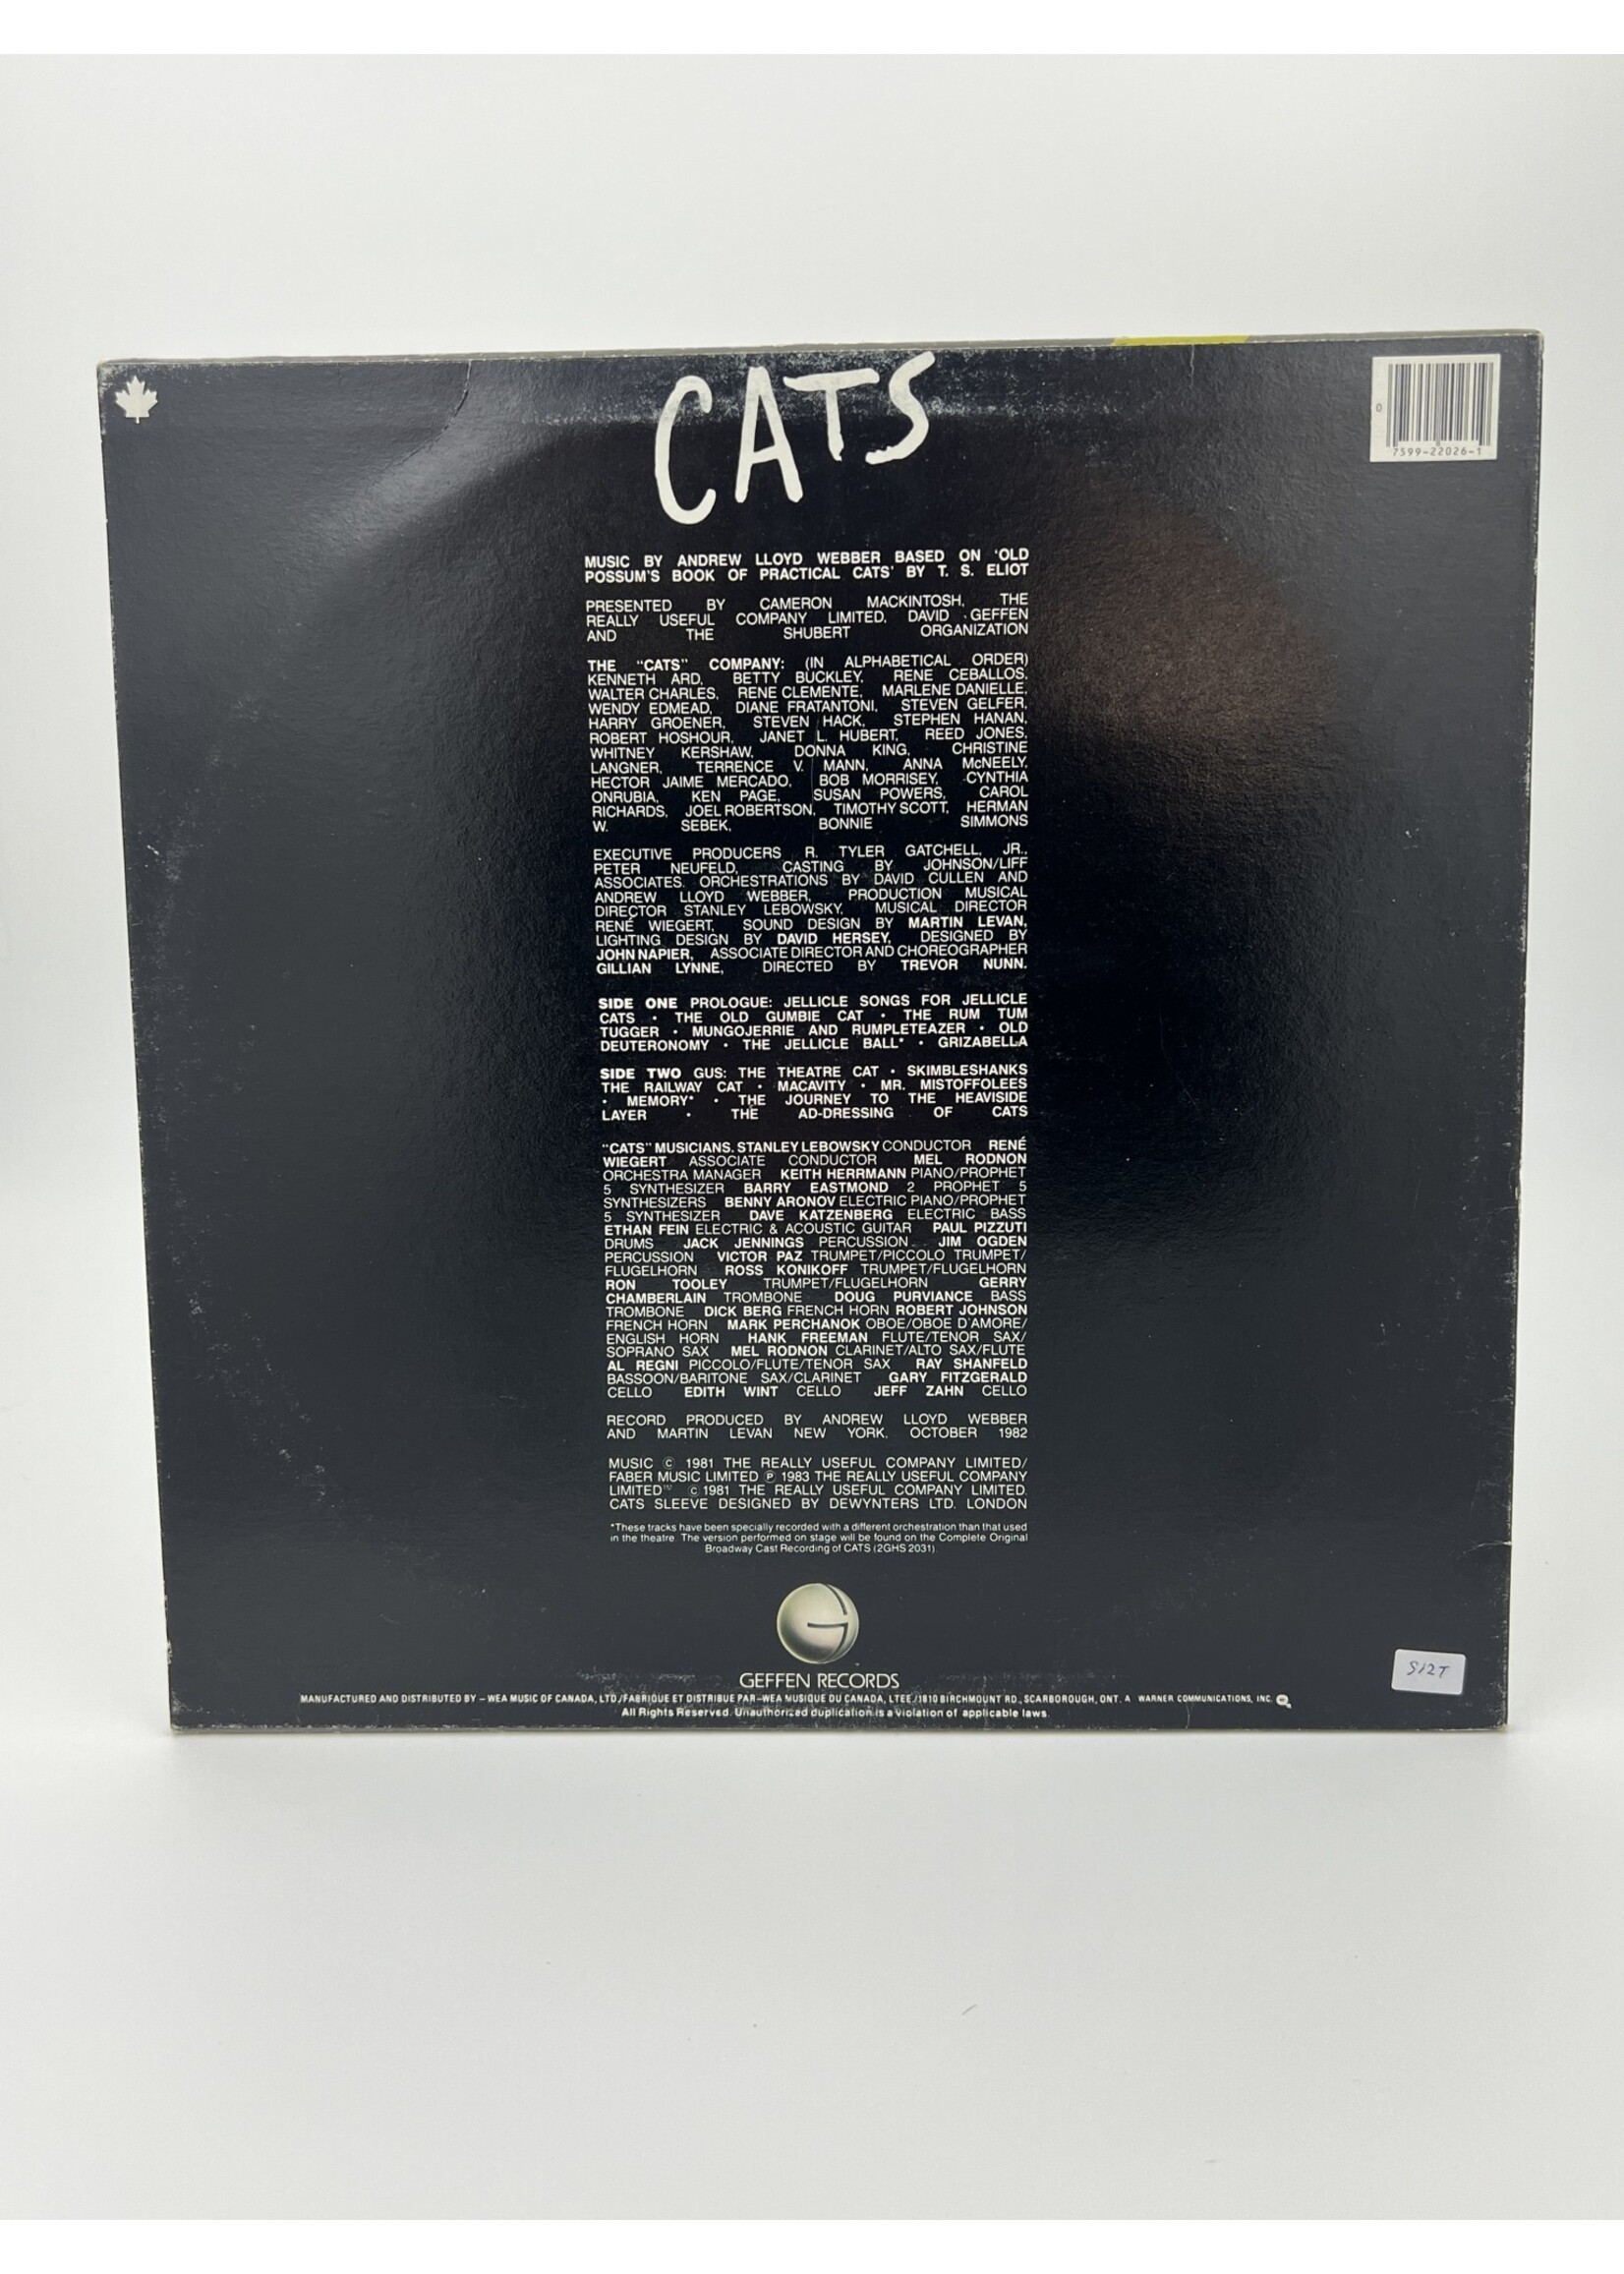 LP   Selections From The Original Broadway Cast Recording LP Record